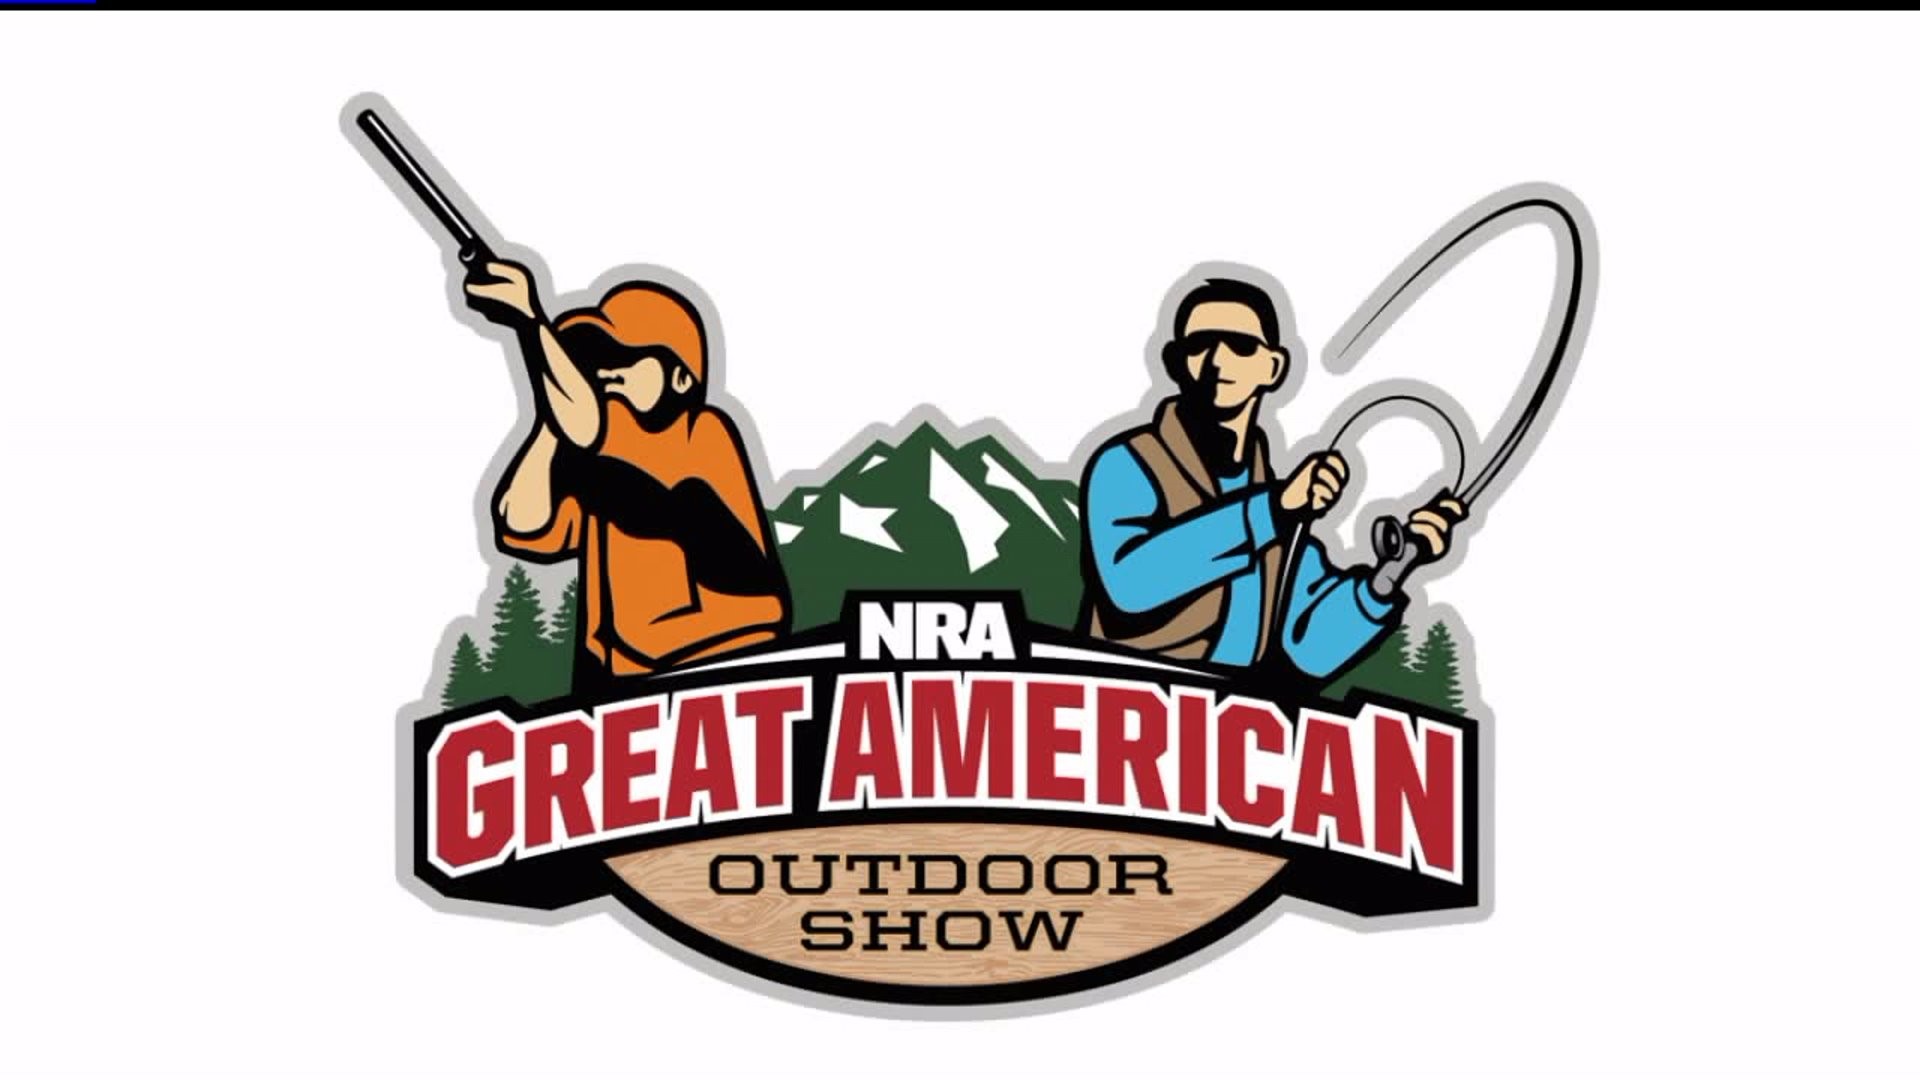 The NRA Great American Outdoor Show is in Harrisburg